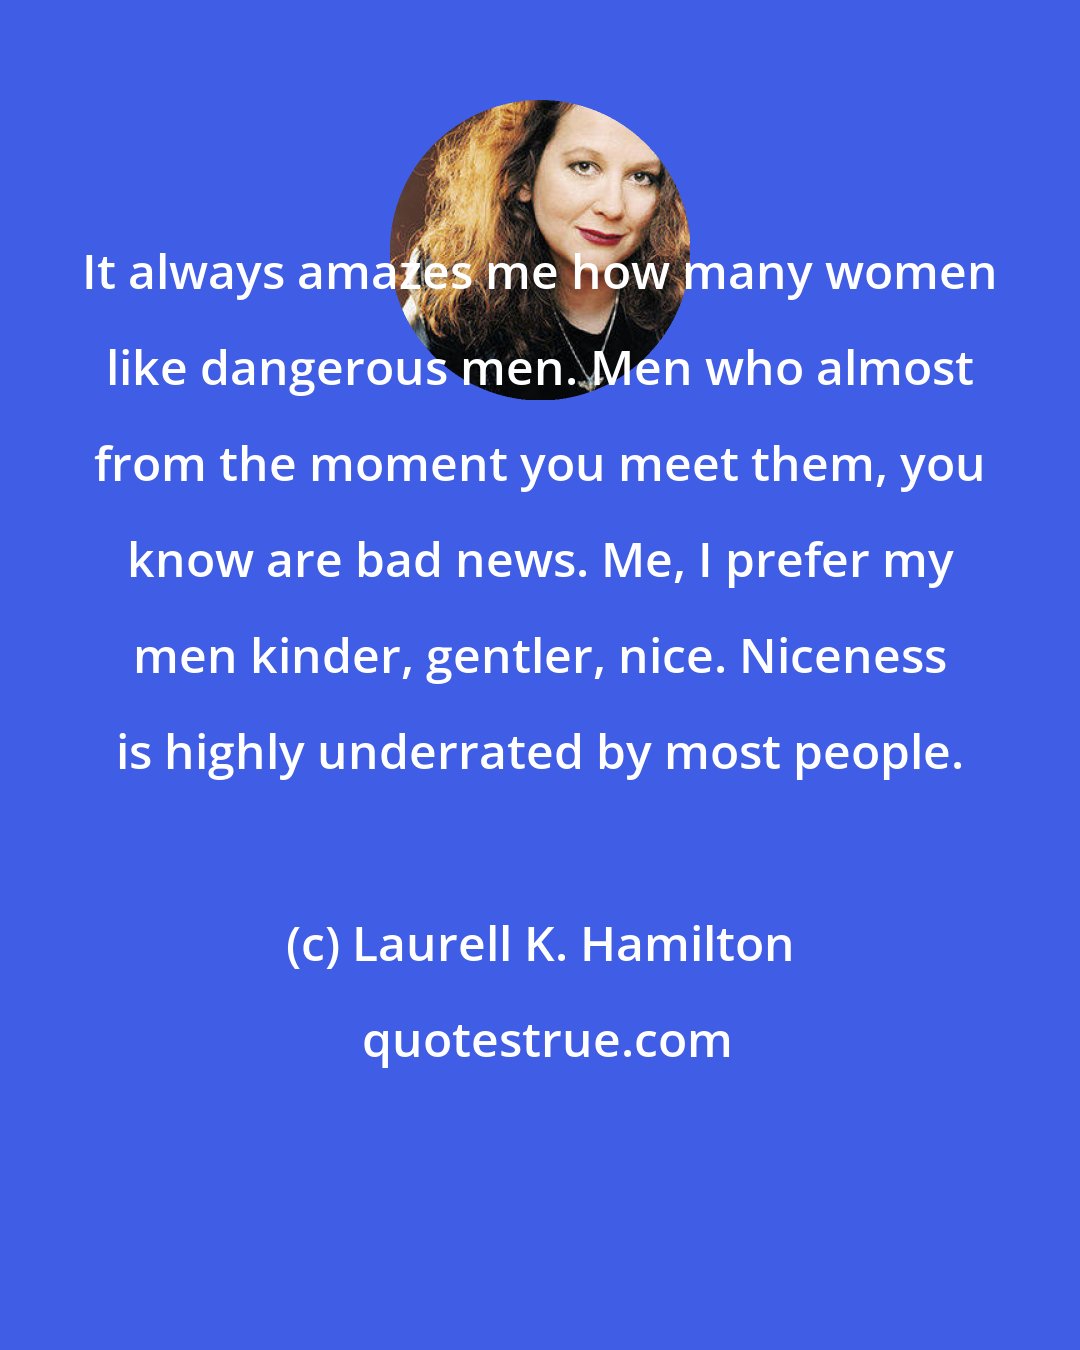 Laurell K. Hamilton: It always amazes me how many women like dangerous men. Men who almost from the moment you meet them, you know are bad news. Me, I prefer my men kinder, gentler, nice. Niceness is highly underrated by most people.